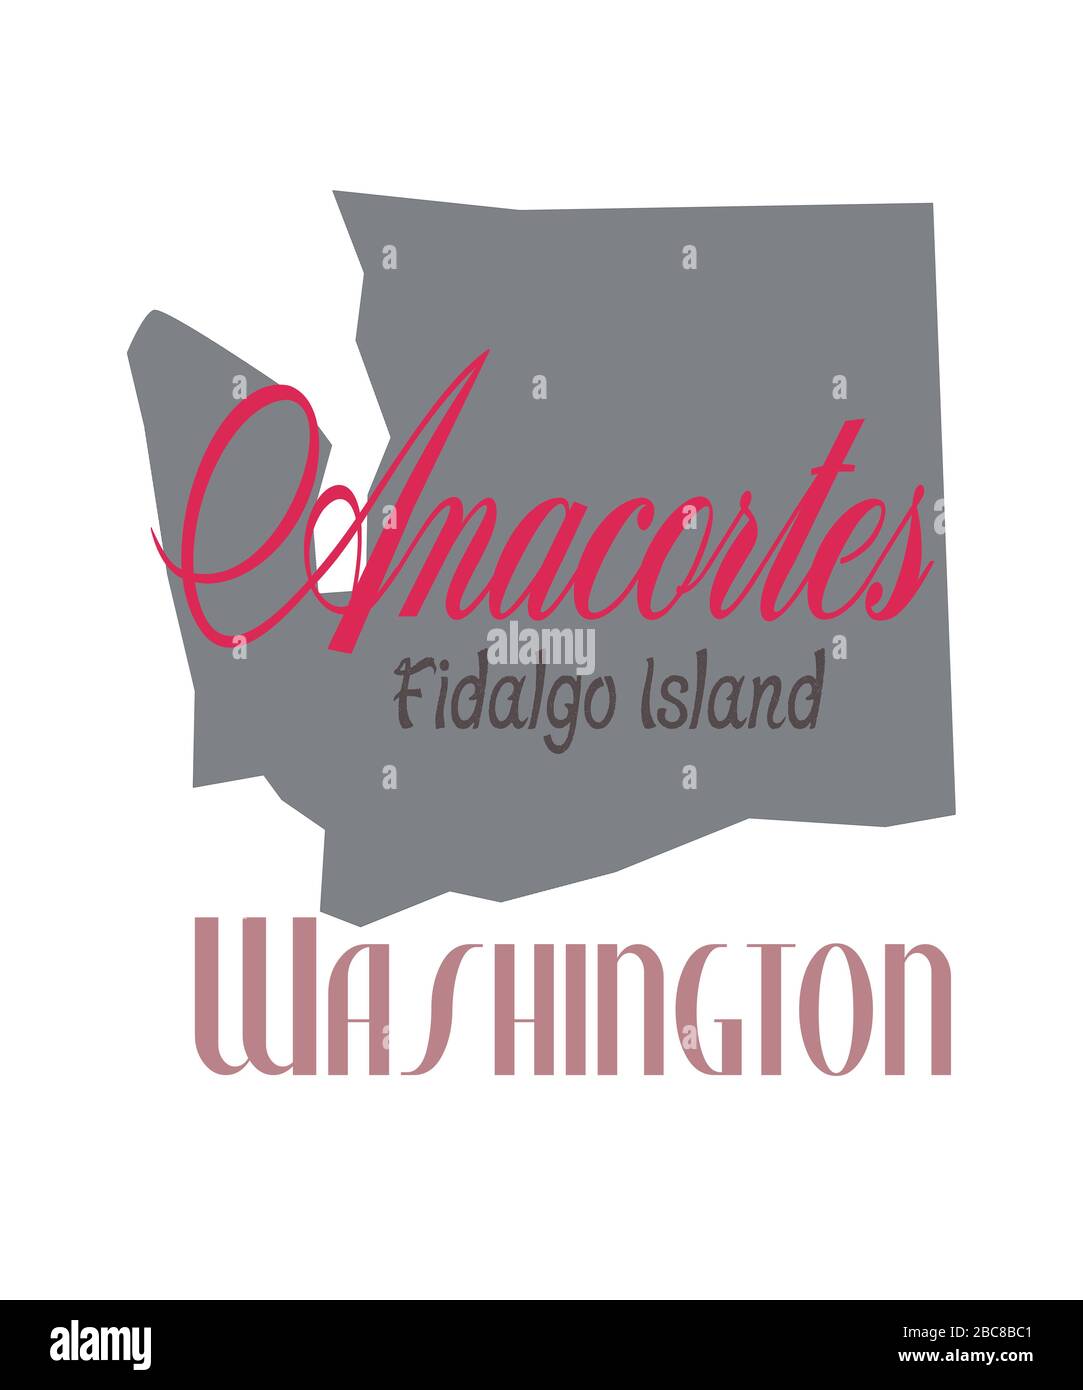 Anacortes Washington graphic in the shape of Washington state.  Located in Skagit County on Fidalgo Island illustration in gray, and pinks. Stock Photo